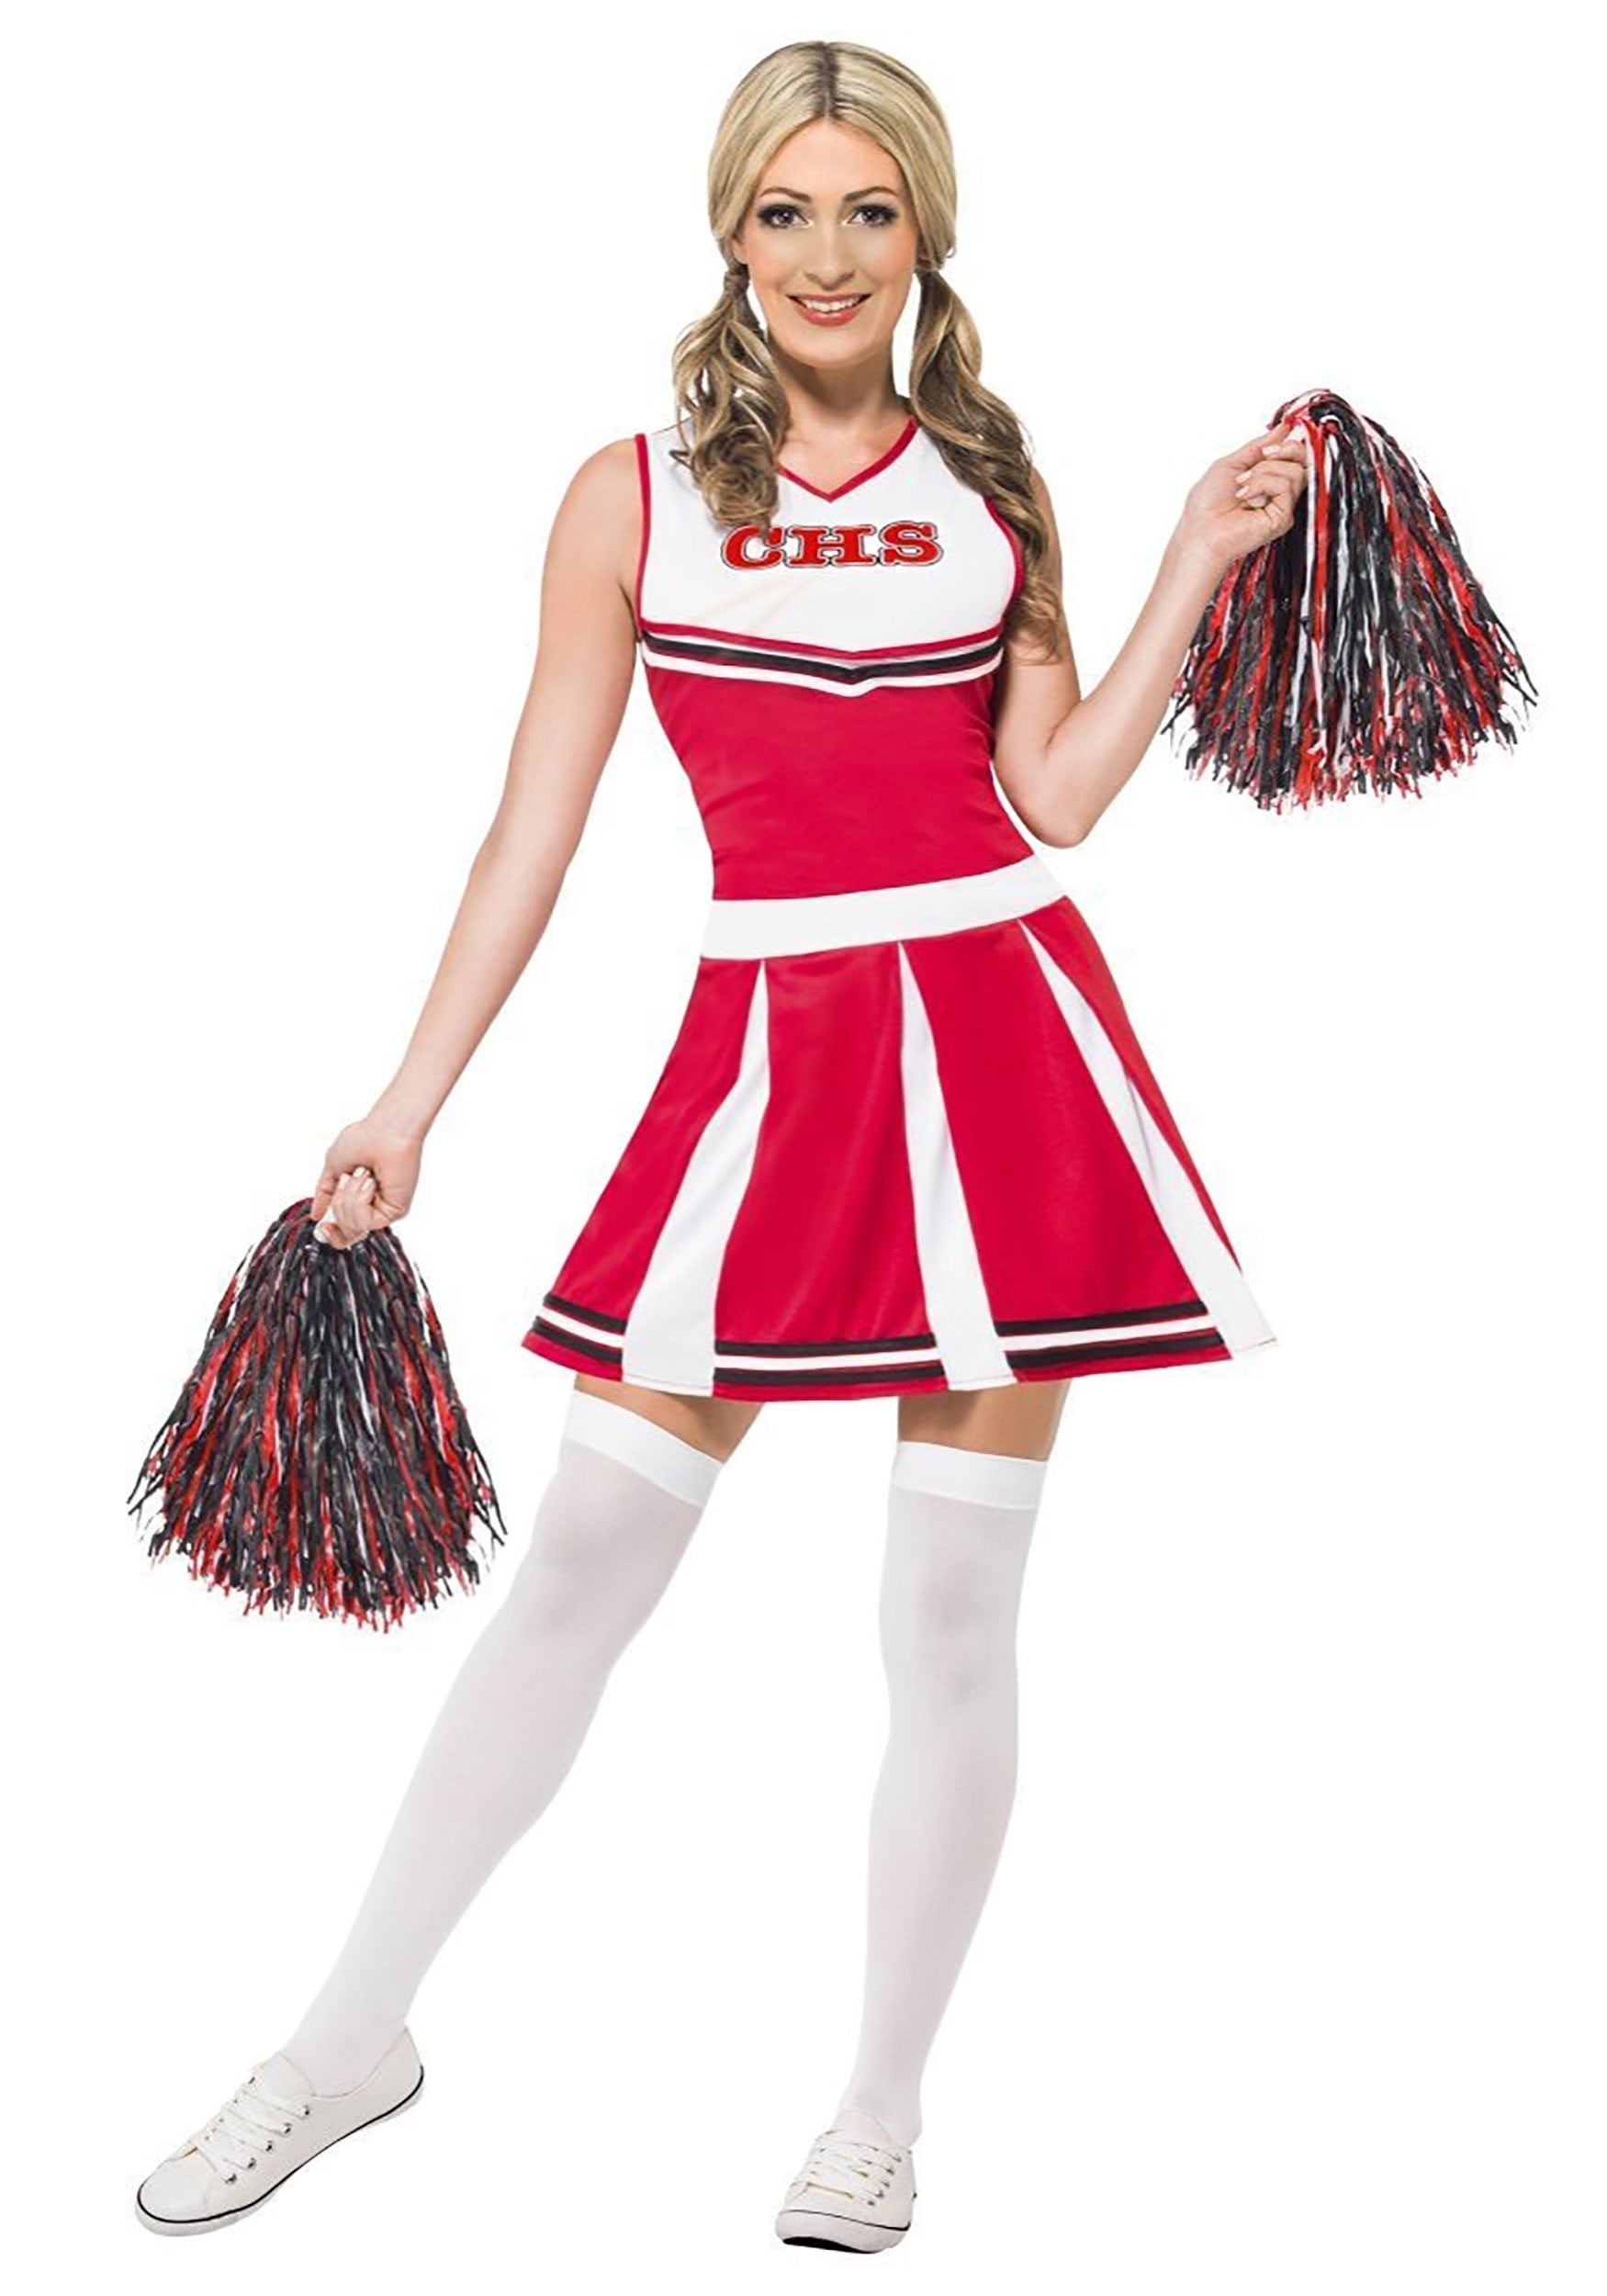 New With Tag Girls Cheerleader Uniform Outfit Costume Christmas Present Size S 